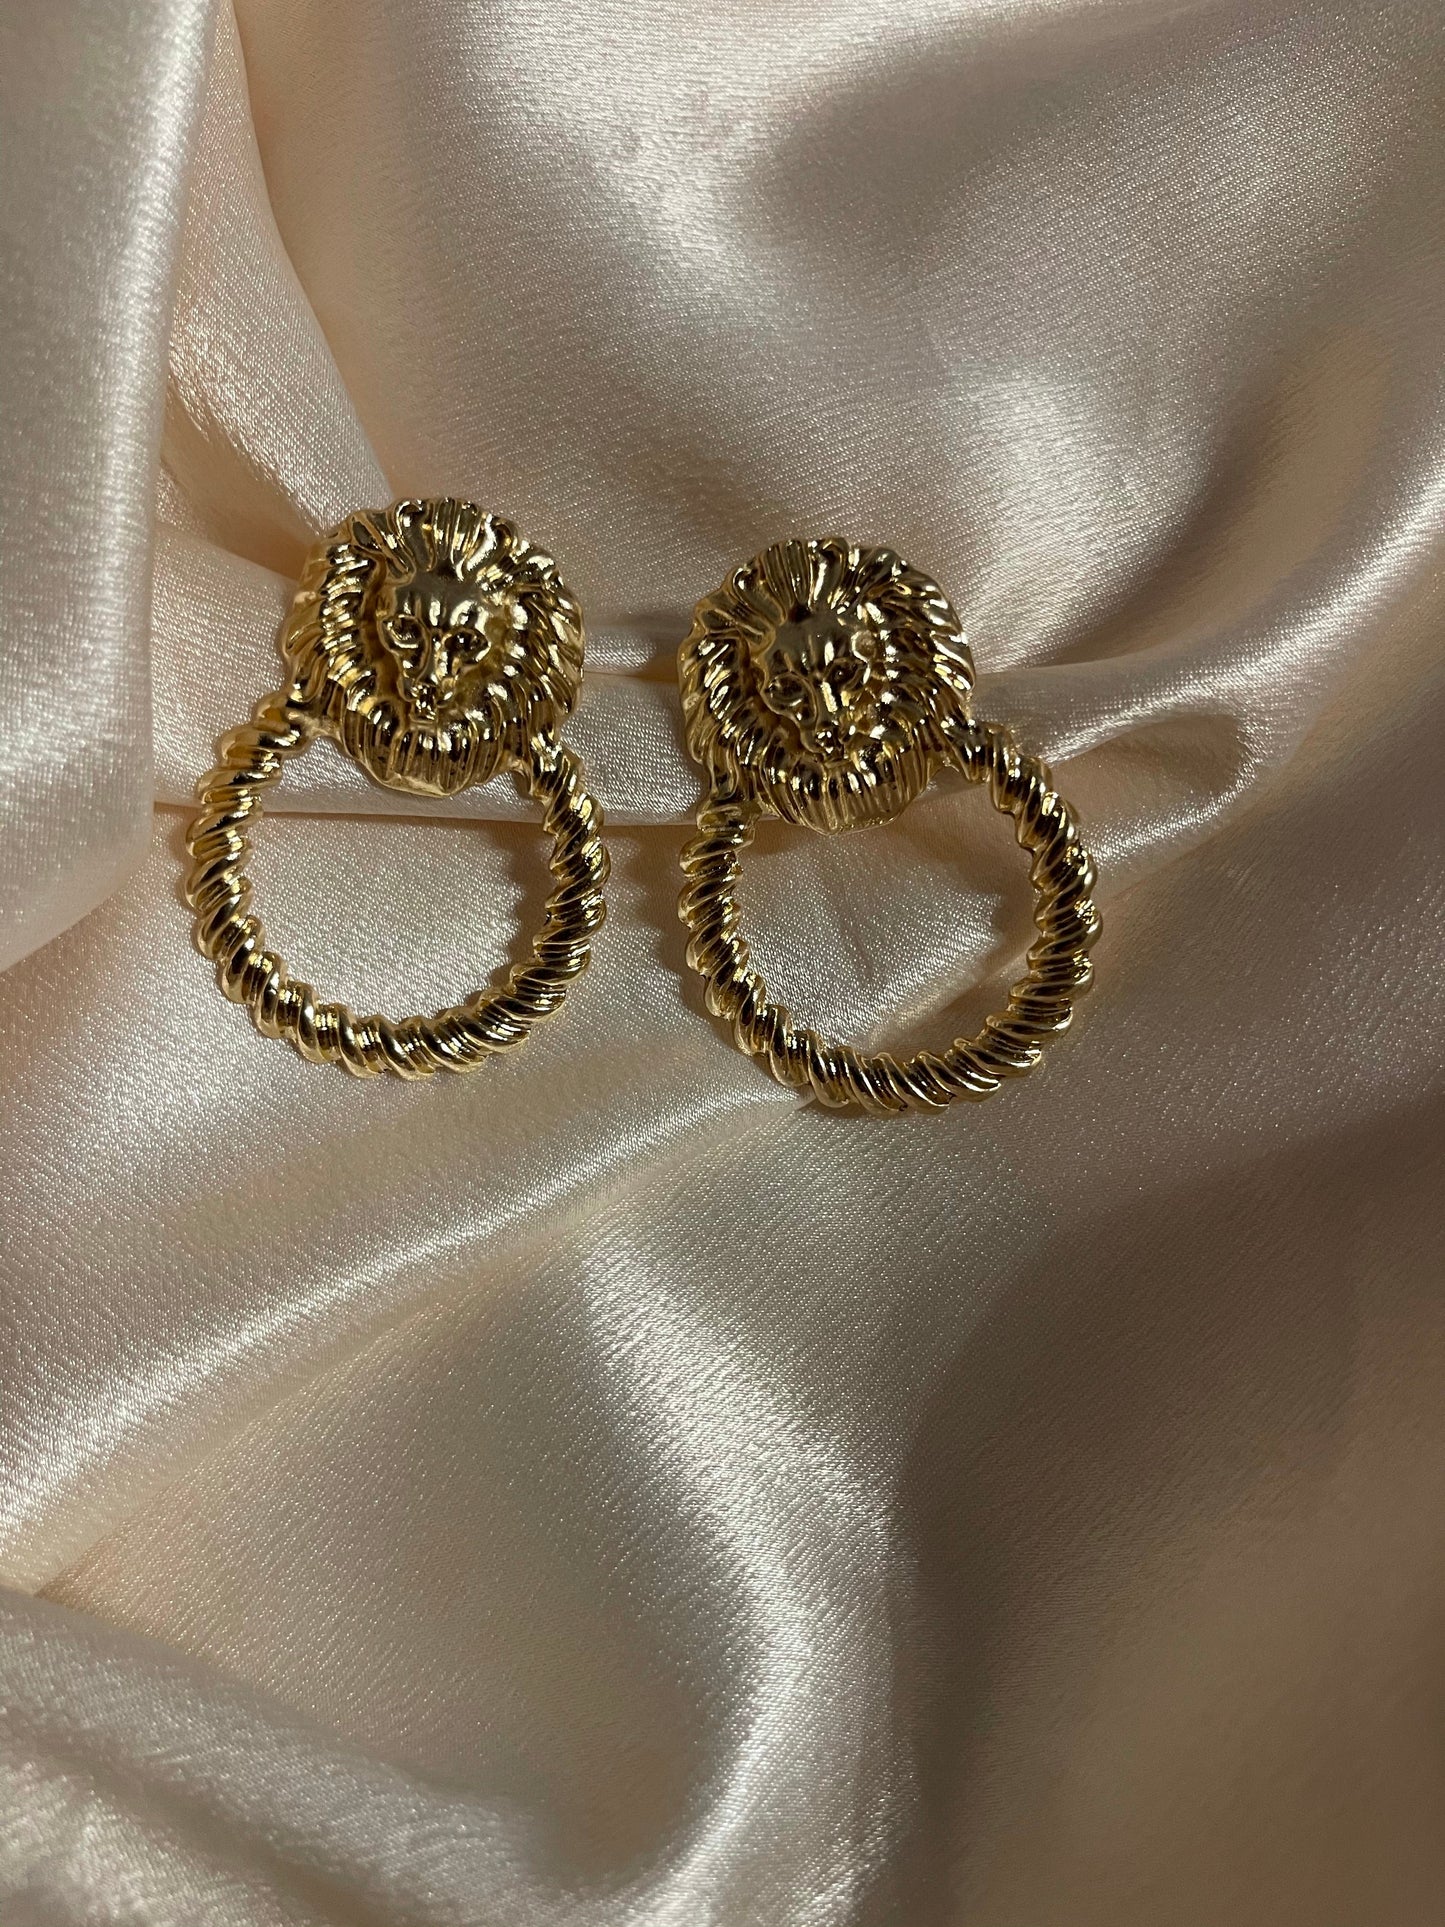 Leoncitos earrings